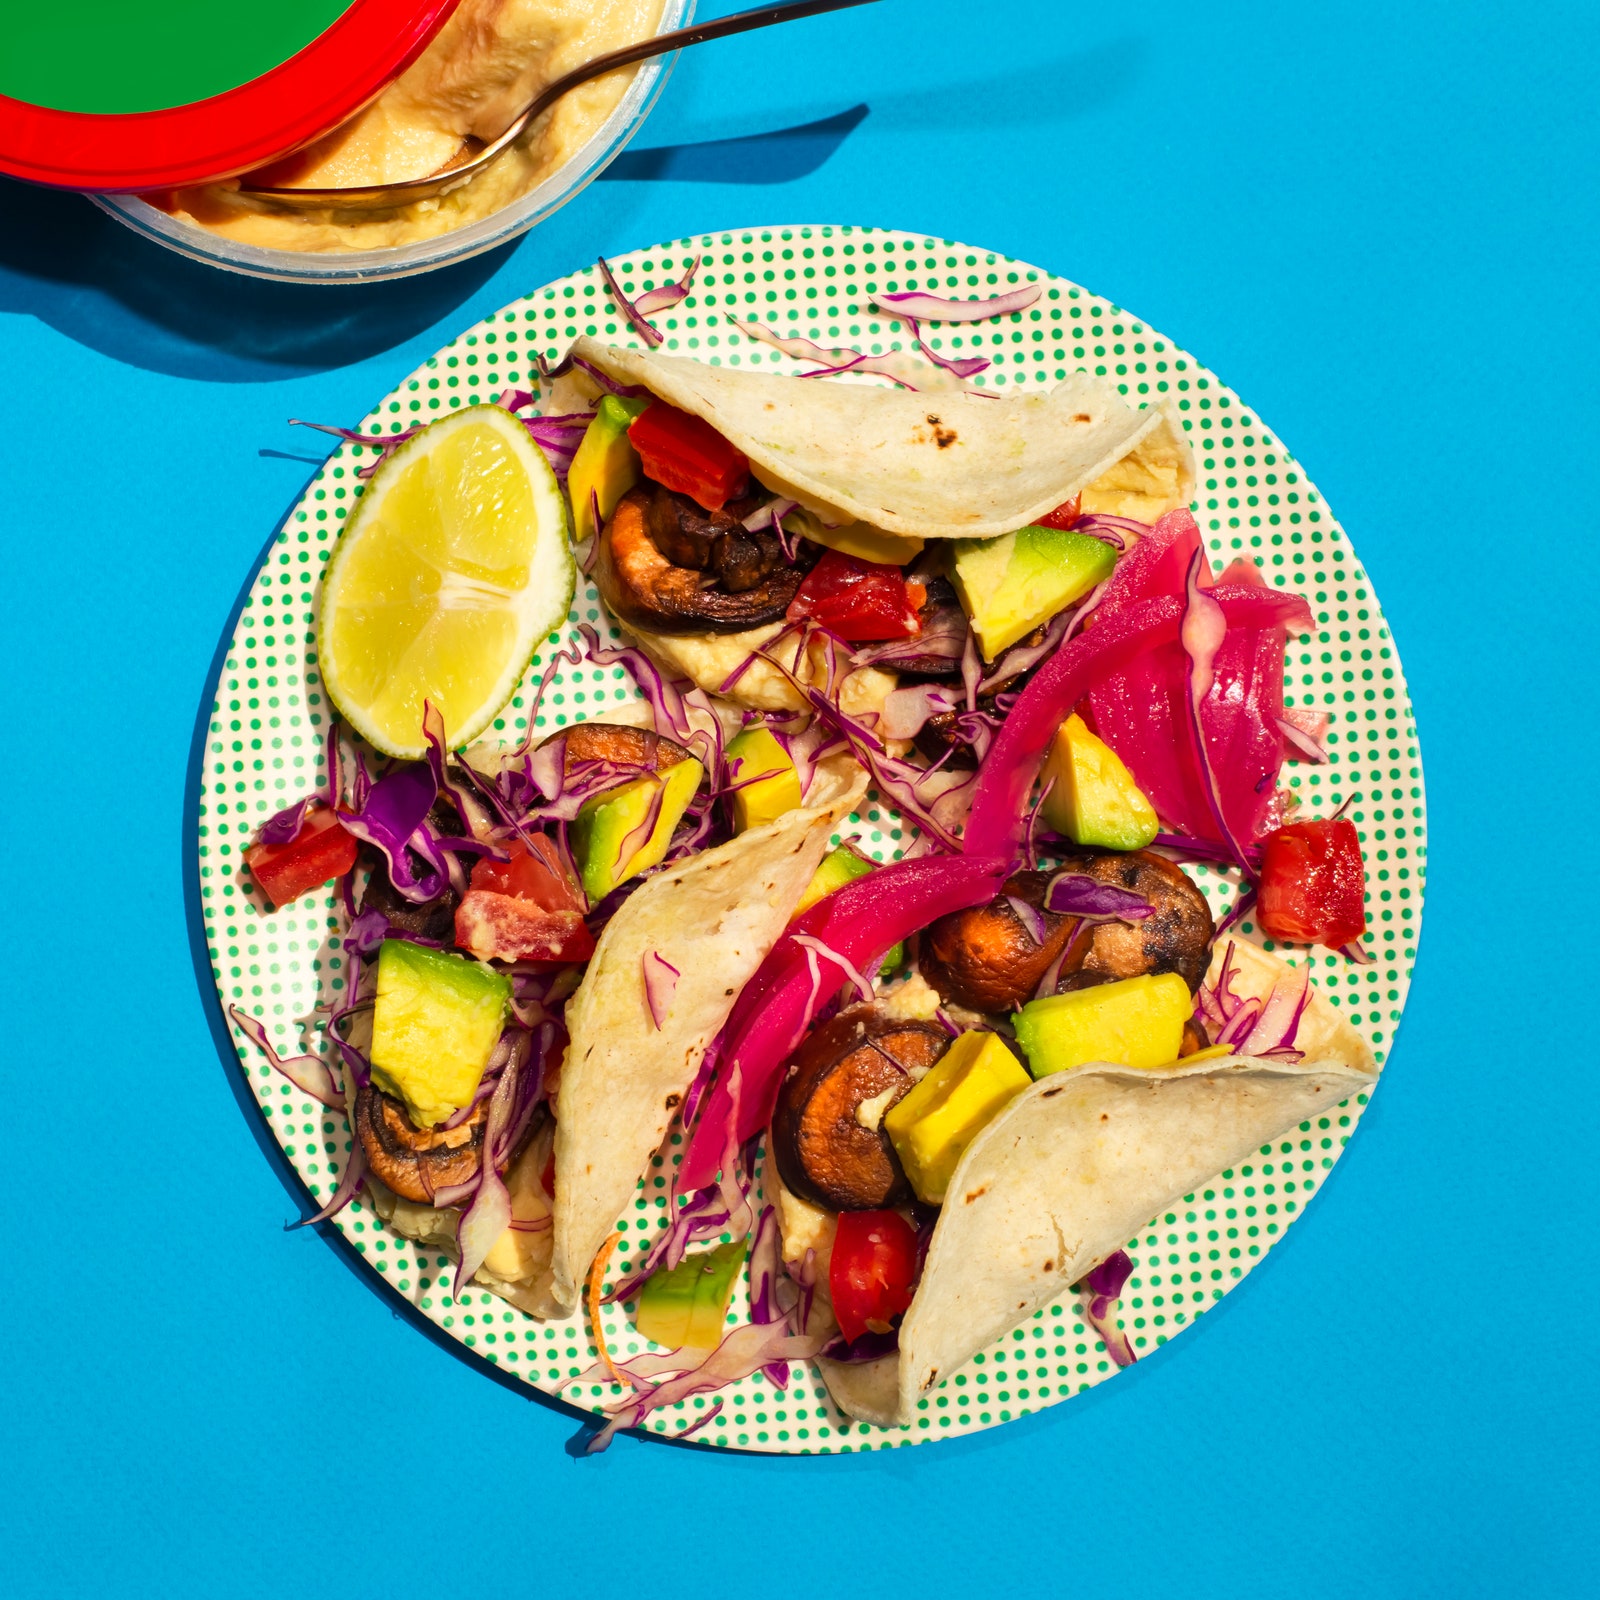 Delicious Vegetarian Taco Recipes Even Meat Eaters Will Love